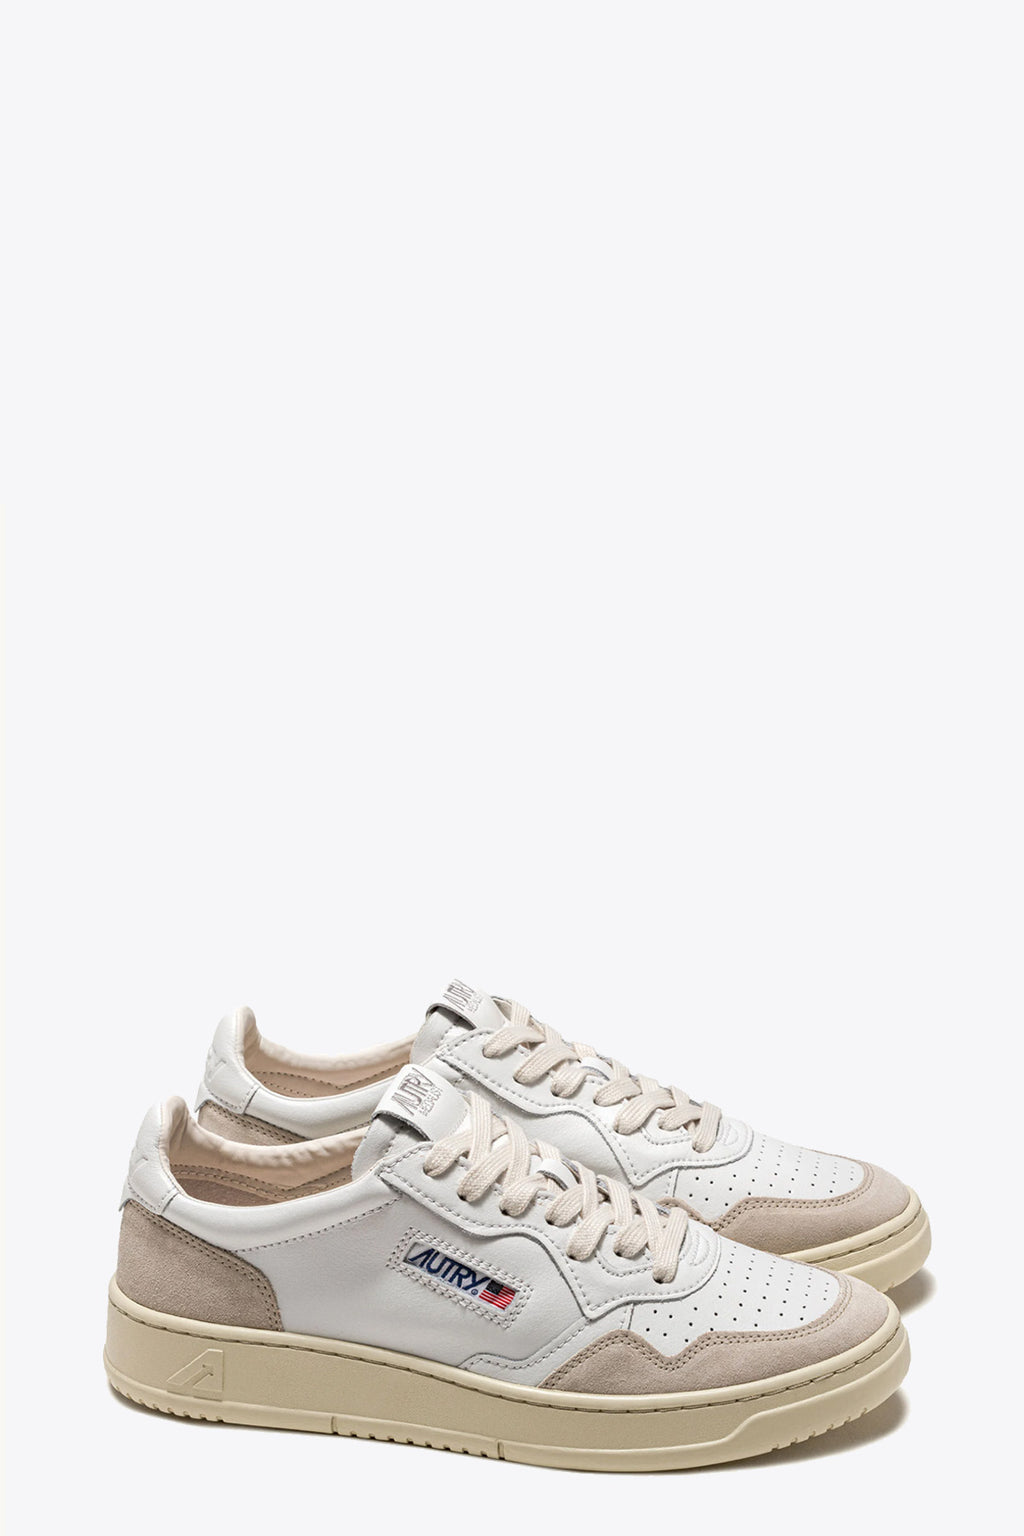 alt-image__White-leather-low-sneaker-with-suede-details---Medalist